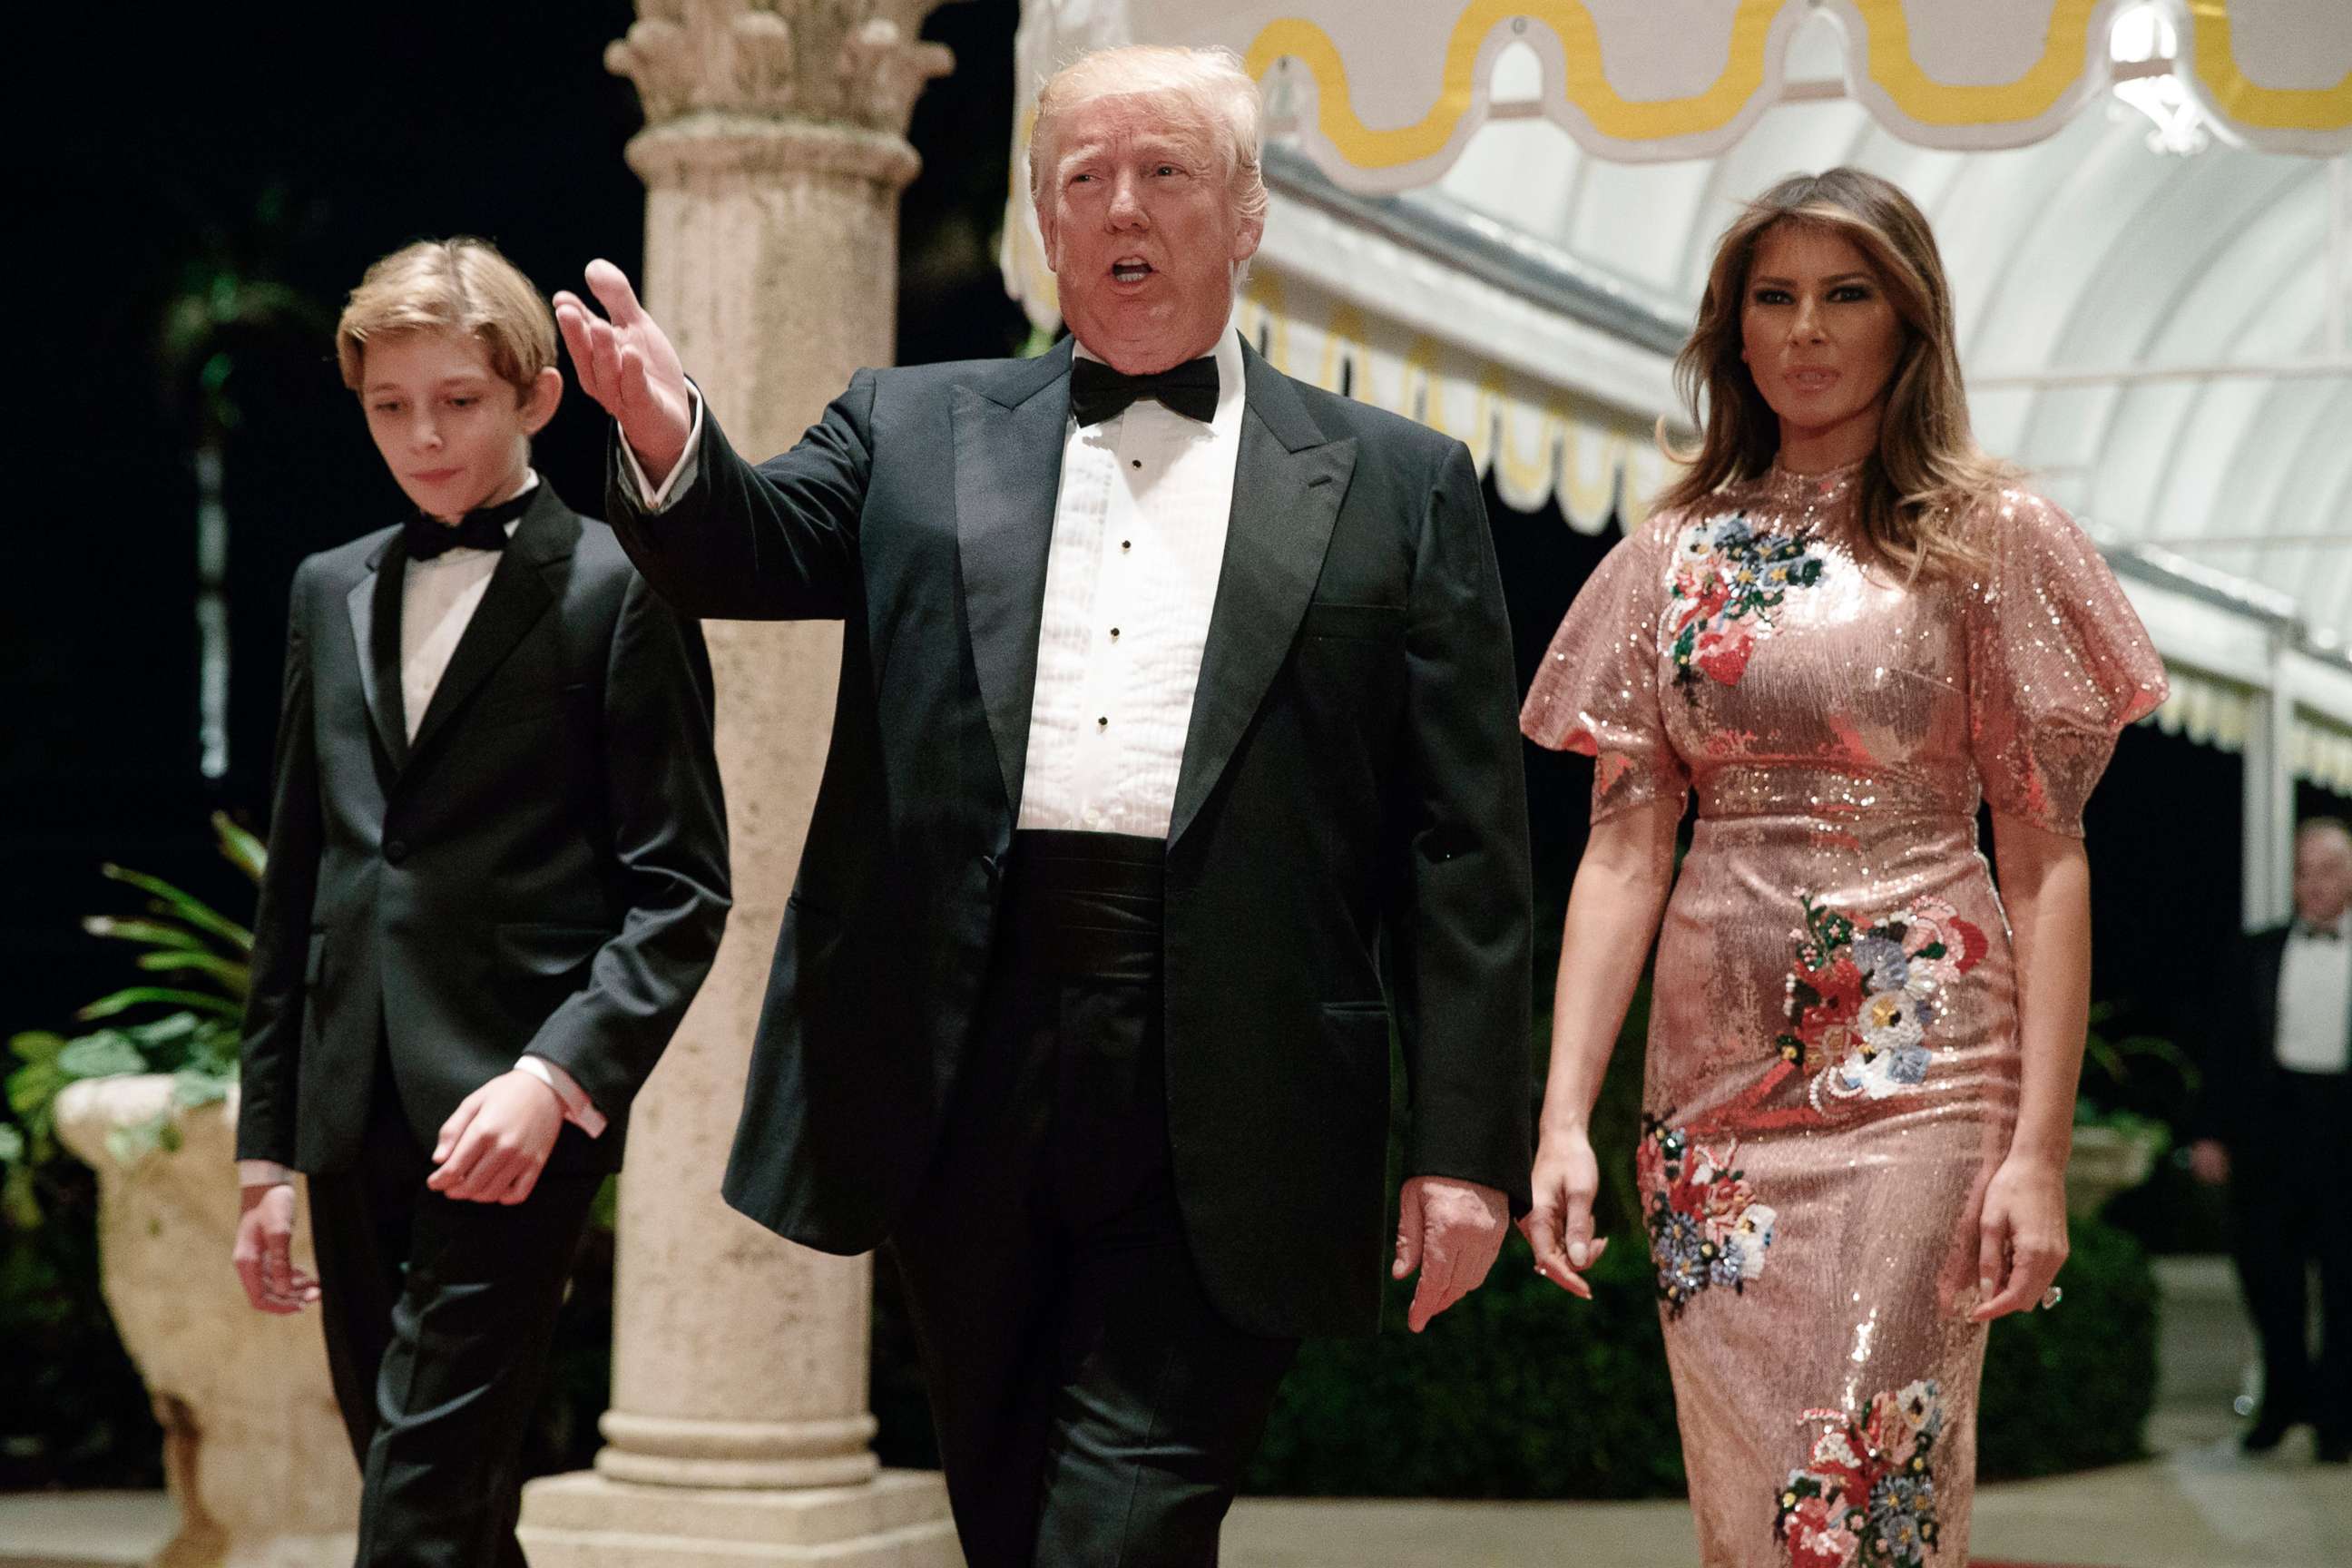 PHOTO: President Donald Trump, first lady Melania Trump, and their son Barron arrive for a New Year's Eve gala at his Mar-a-Lago resort , Dec. 31, 2017, in Palm Beach, Fla.